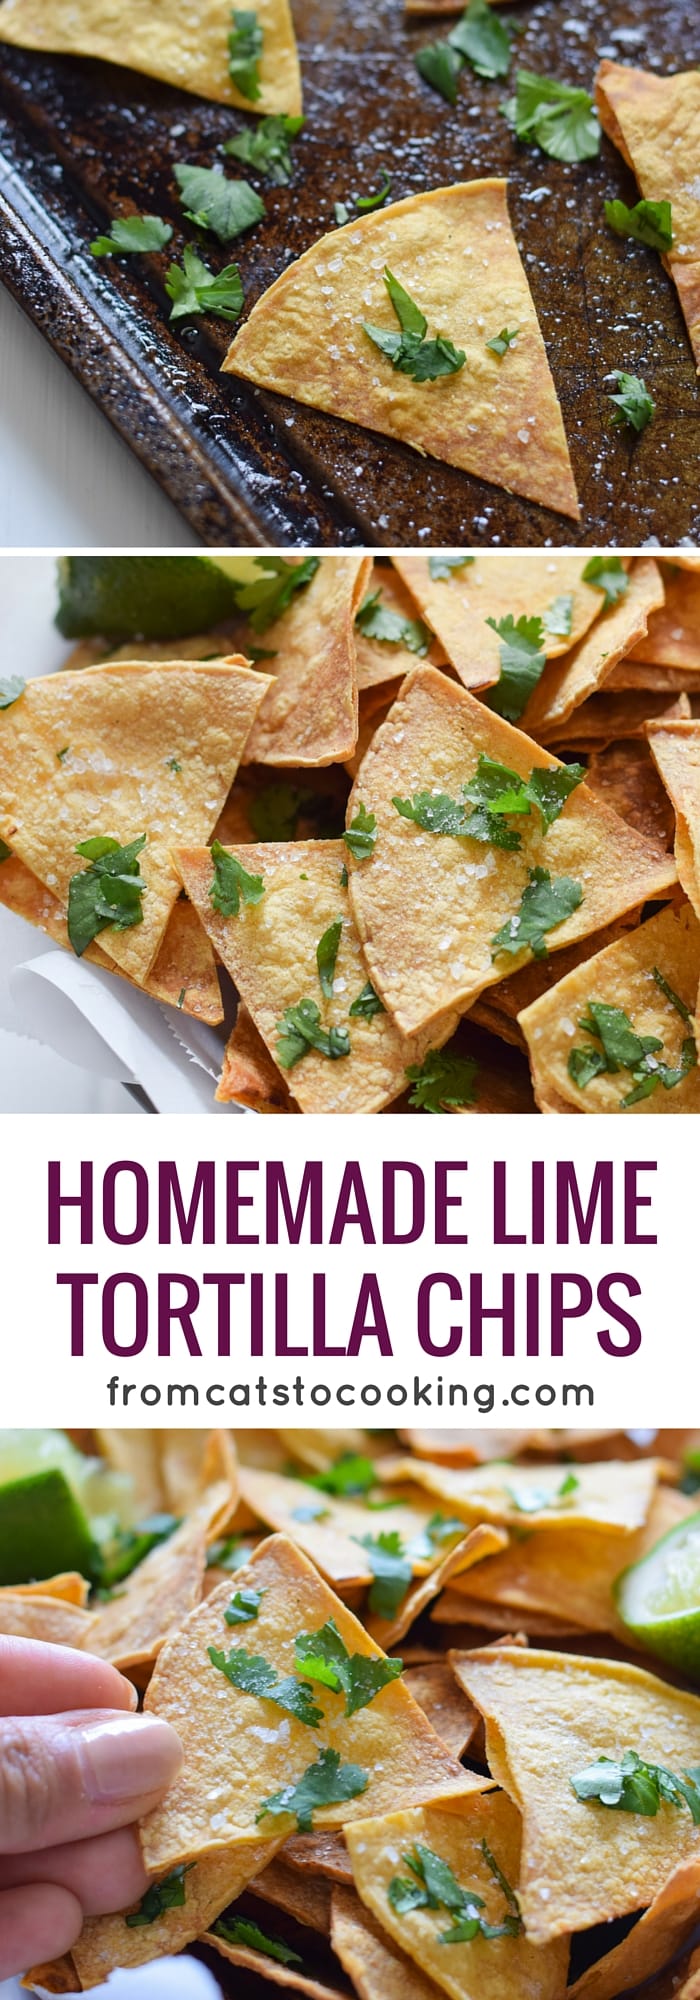 These Homemade Lime Tortilla Chips are crunchy, salty, easy to make and are baked with a hint of lime for a nice little zesty kick. They've taken my chips and salsa game to a whole new level! Perfect on their own as a snack or with some guac or salsa as an appetizer.